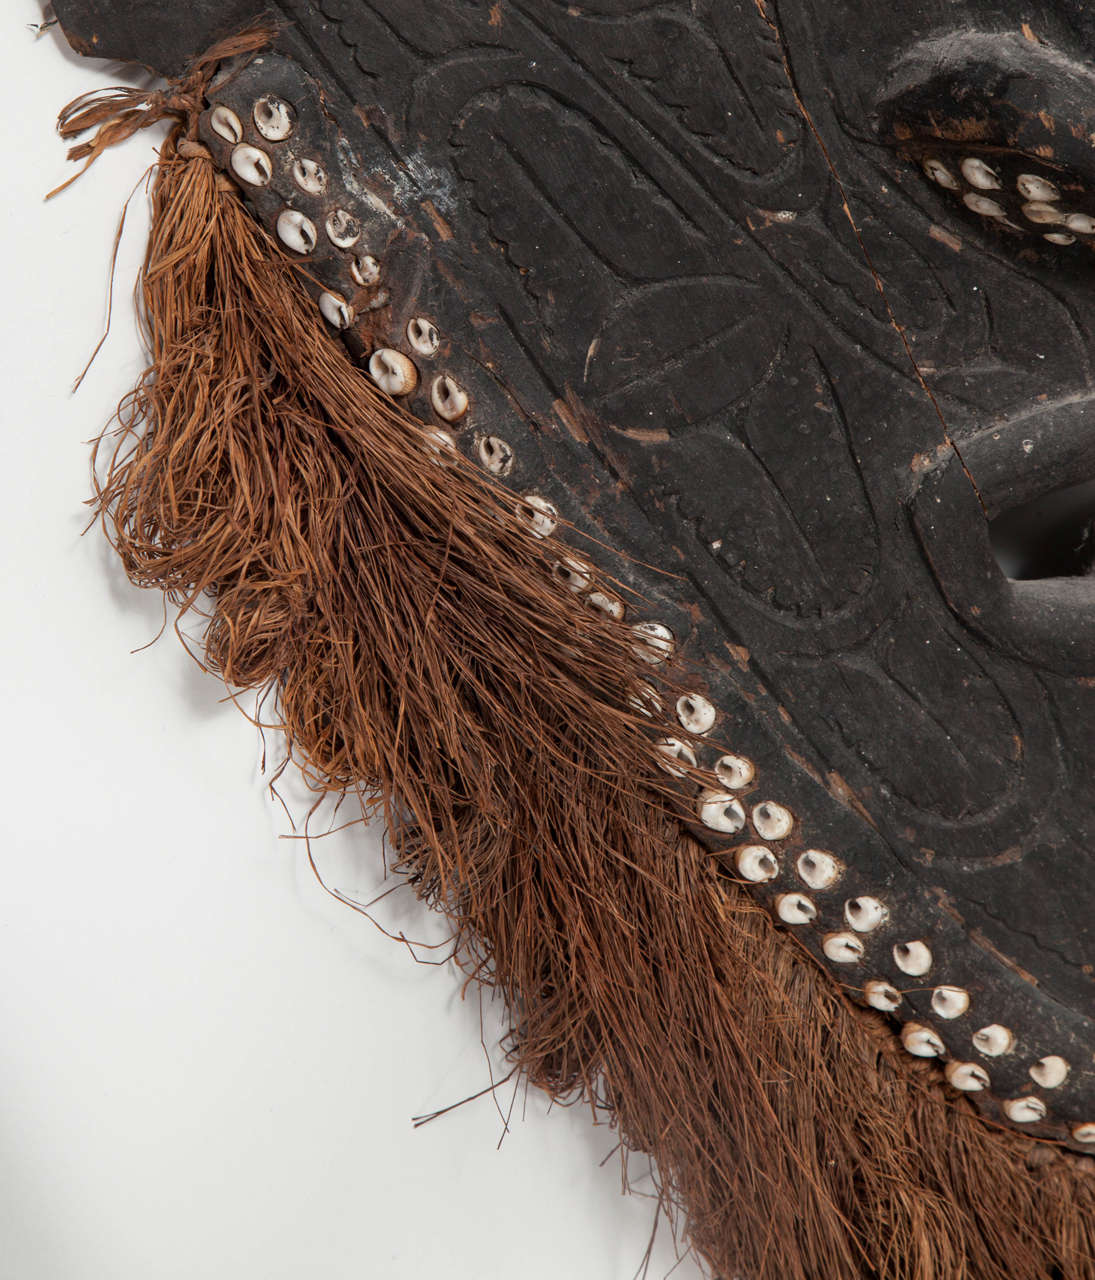 Mid-20th Century Decorative Objects in the Style of Sepik River Mask from Papua New Guinea